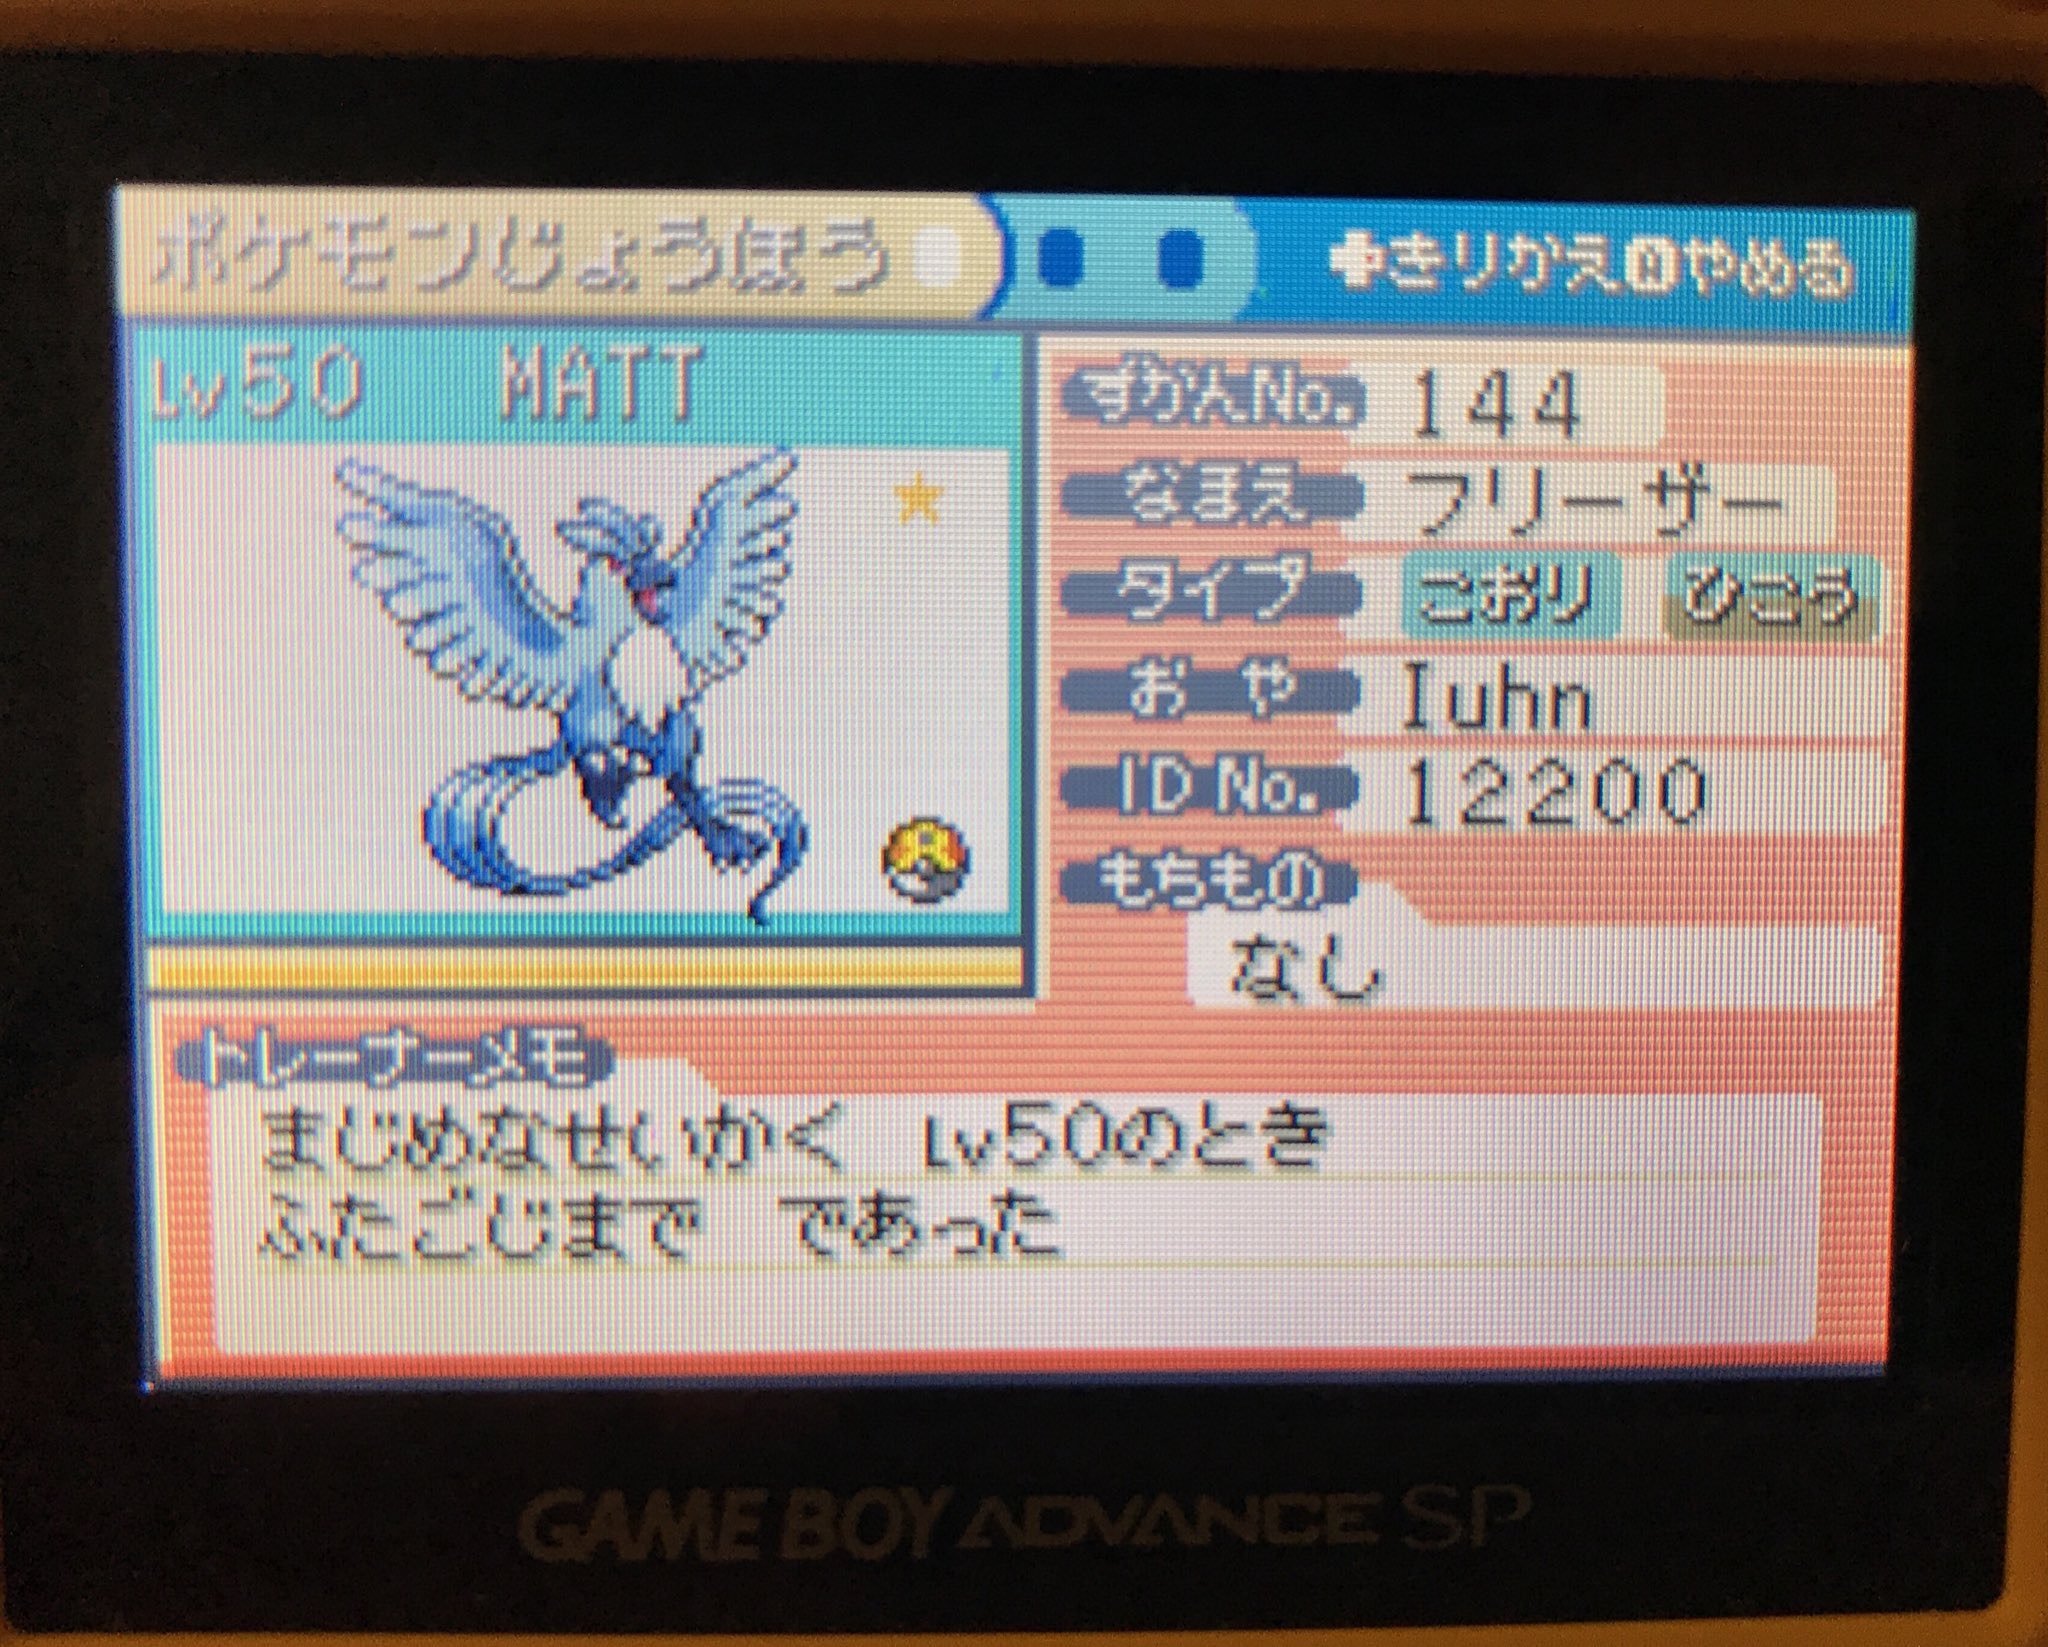 Live! Shiny Articuno in FireRed after only ~1,000 SRs! 